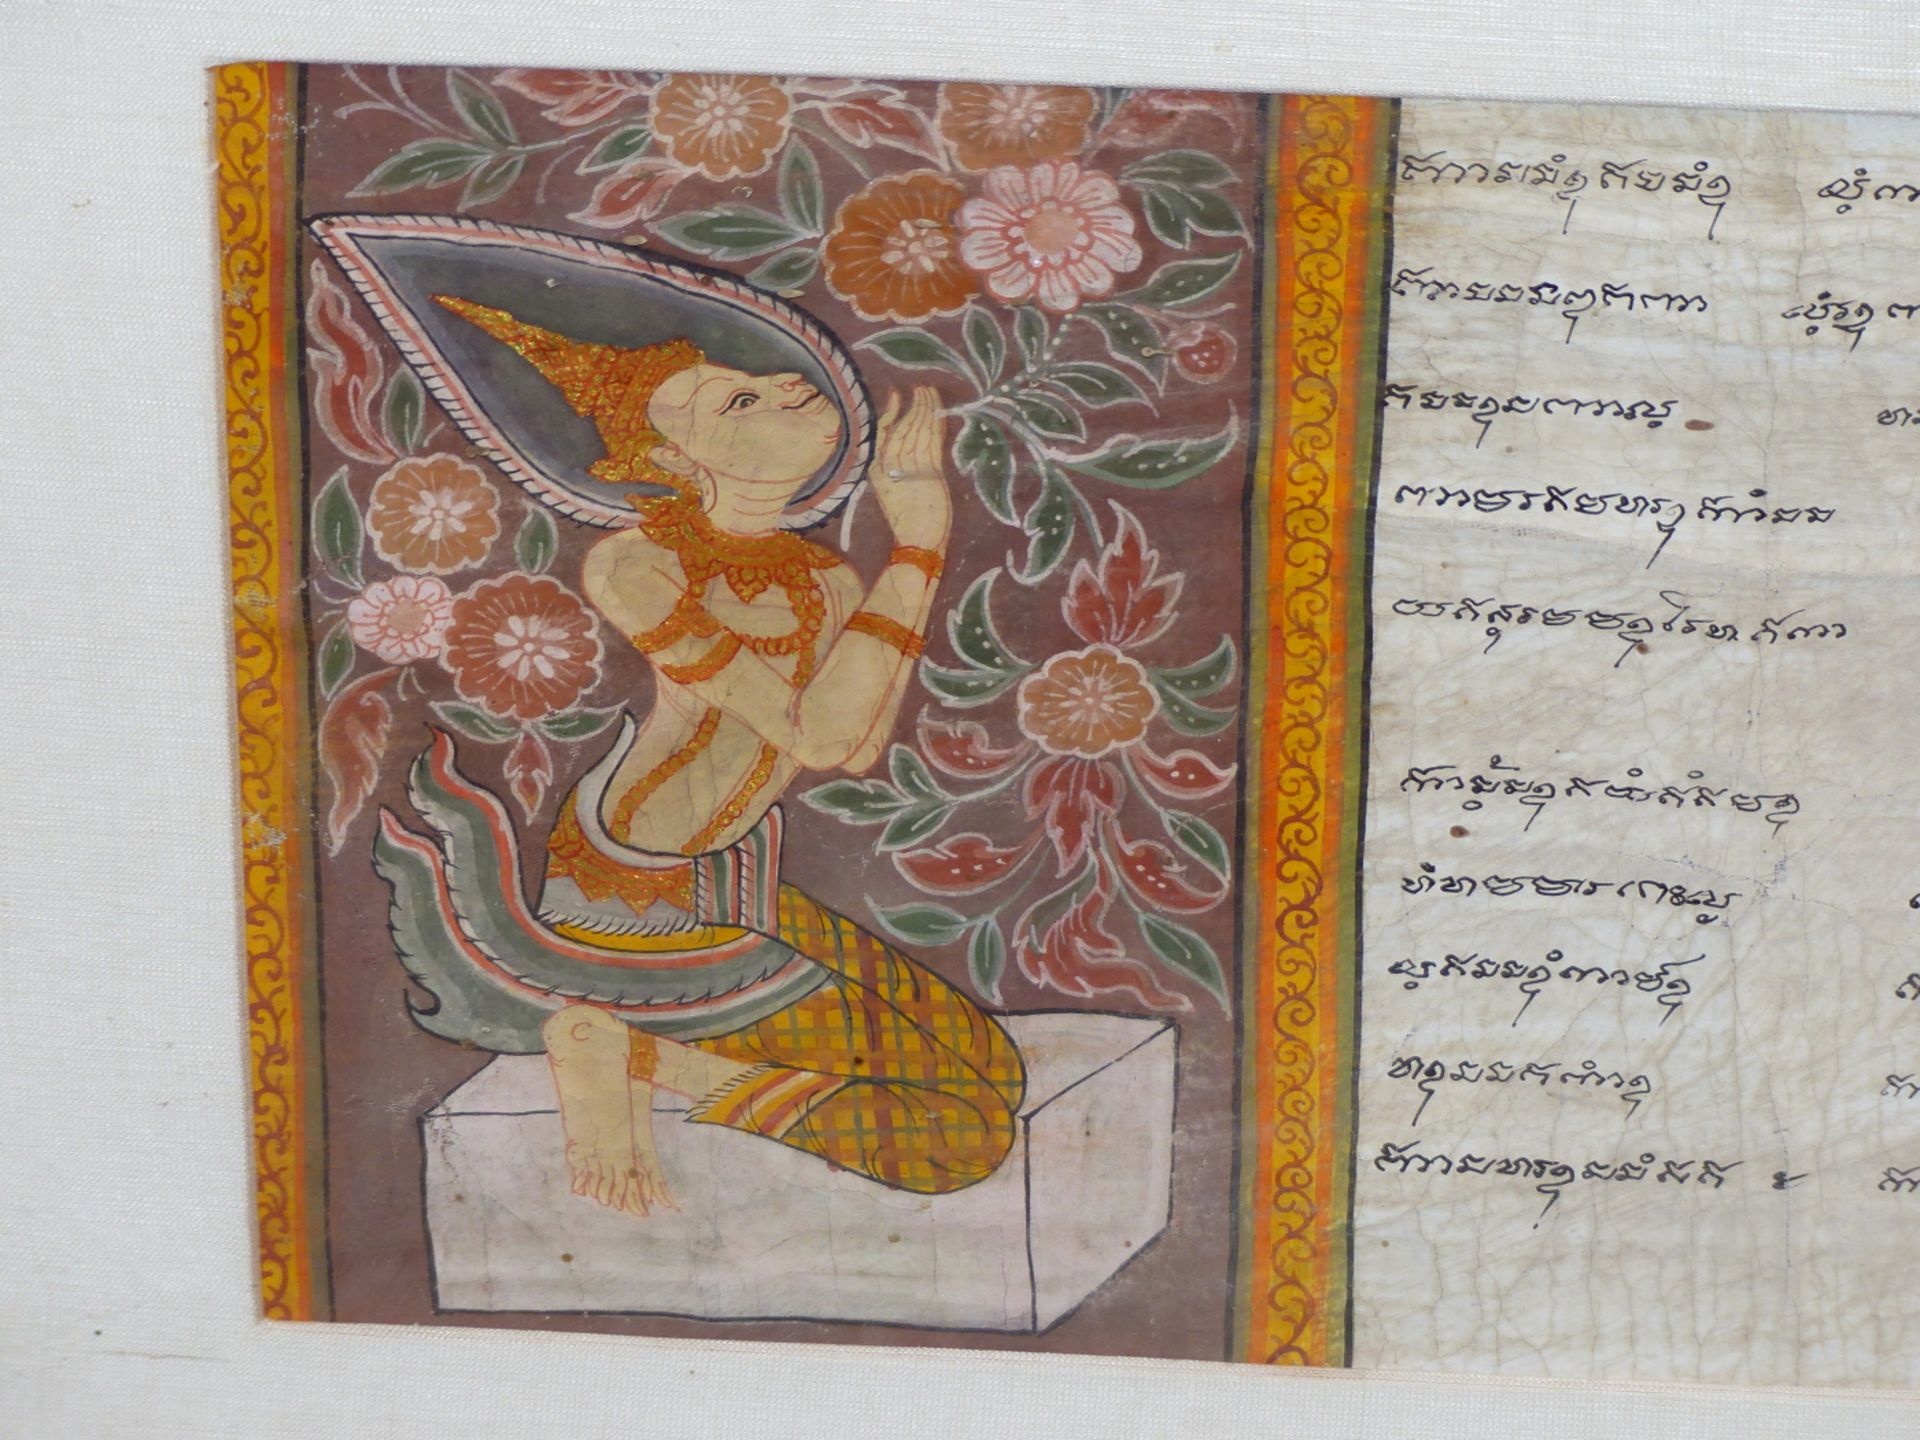 A 19th C. MALAYSIAN MANUSCRIPT FLANKED BY PAINTINGS OF WORSHIPPING FIGURES KNEELING ON PLINTHS - Image 3 of 5